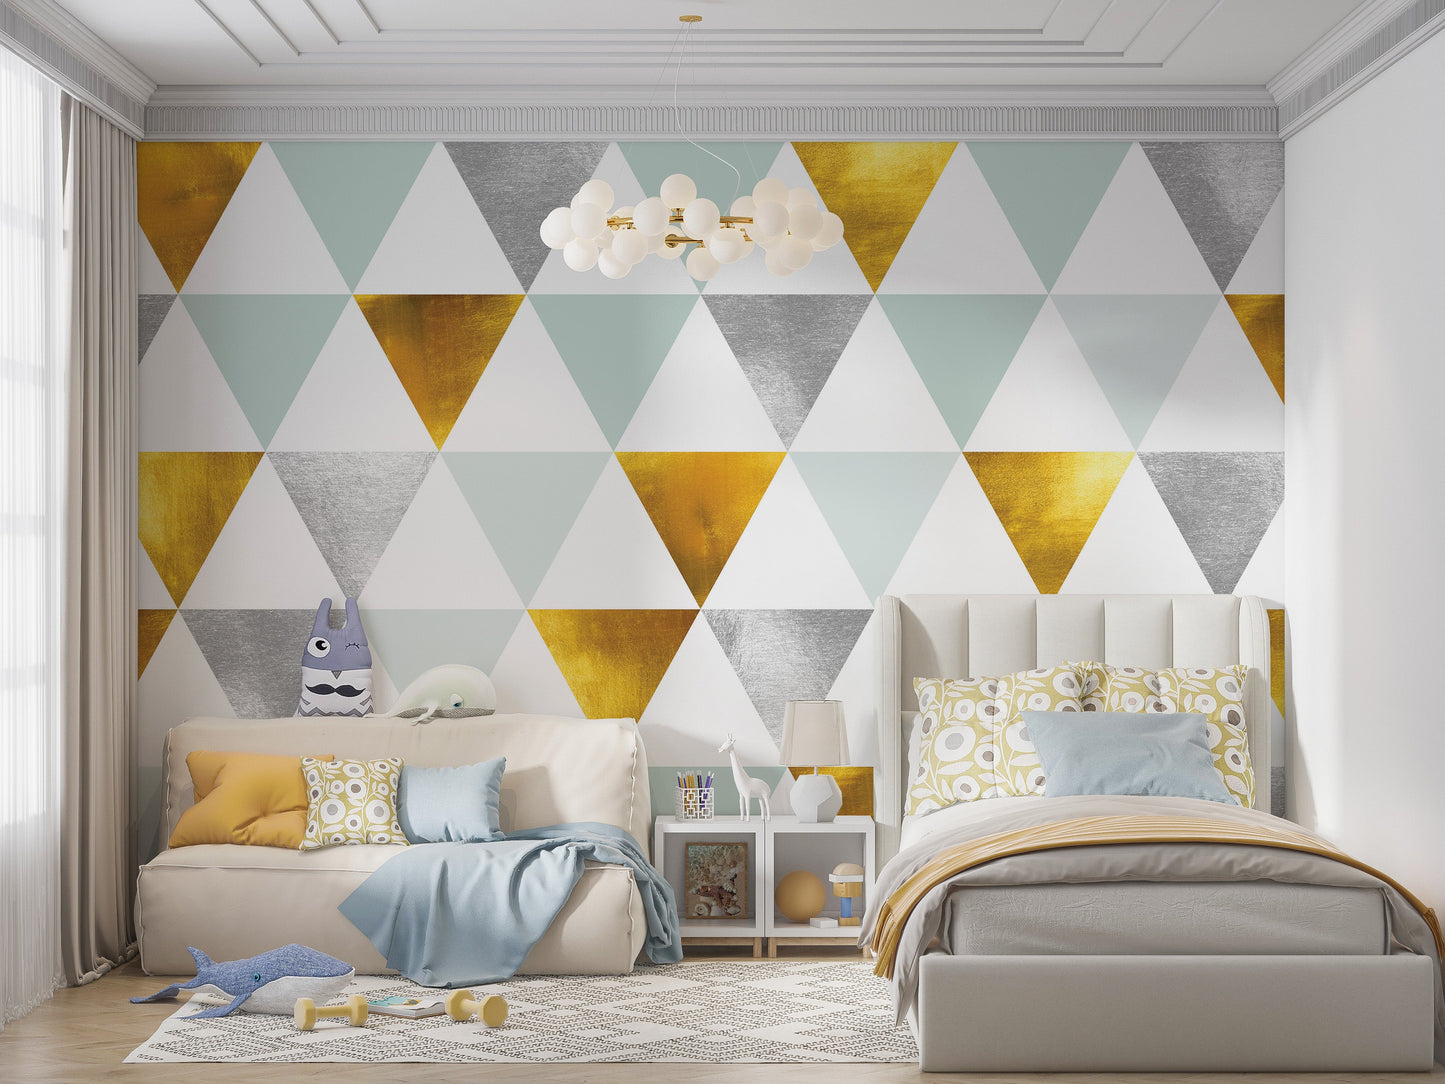 Triangle Geometric Abstract Pattern Wall Mural. Gold, Silver, Teal, Turquoise and White Color Pattern. #6306